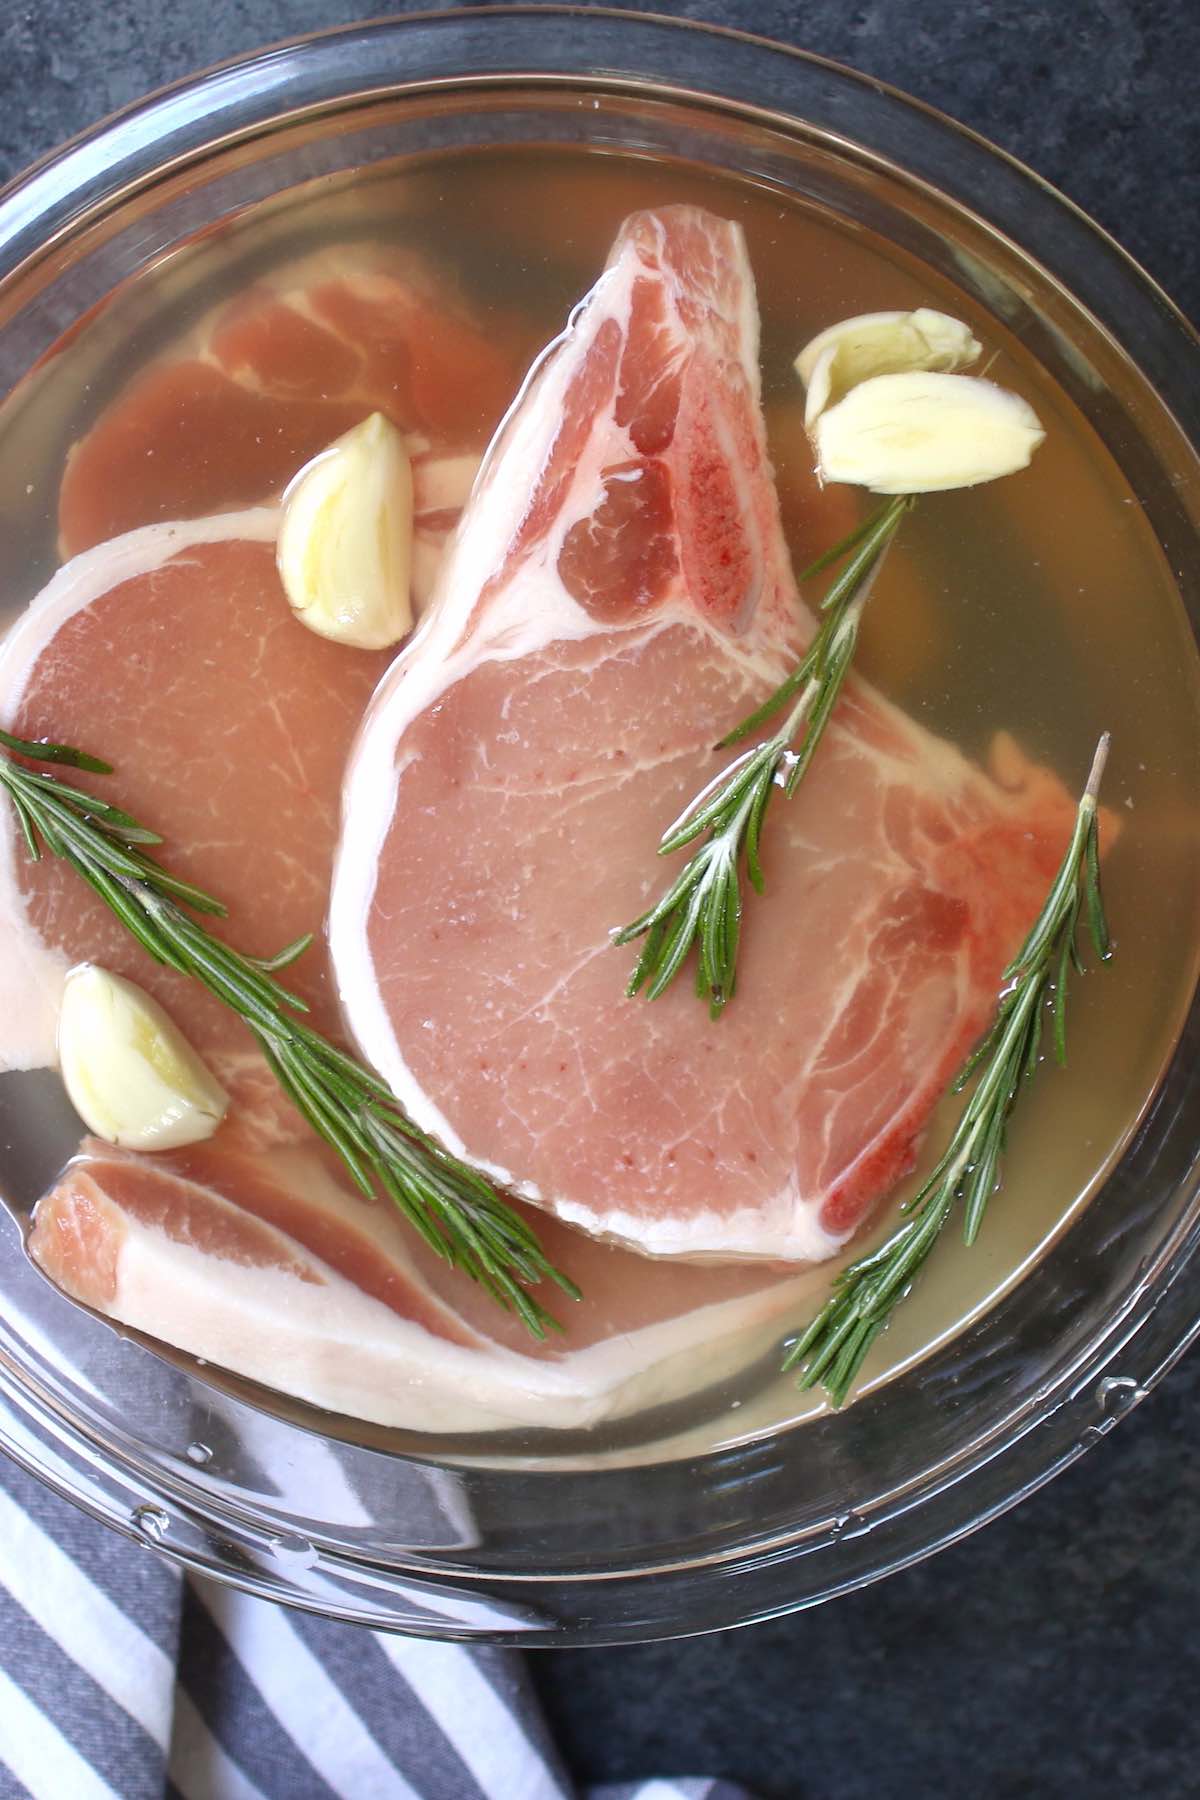 Pork chops in brine with garlic and rosemary